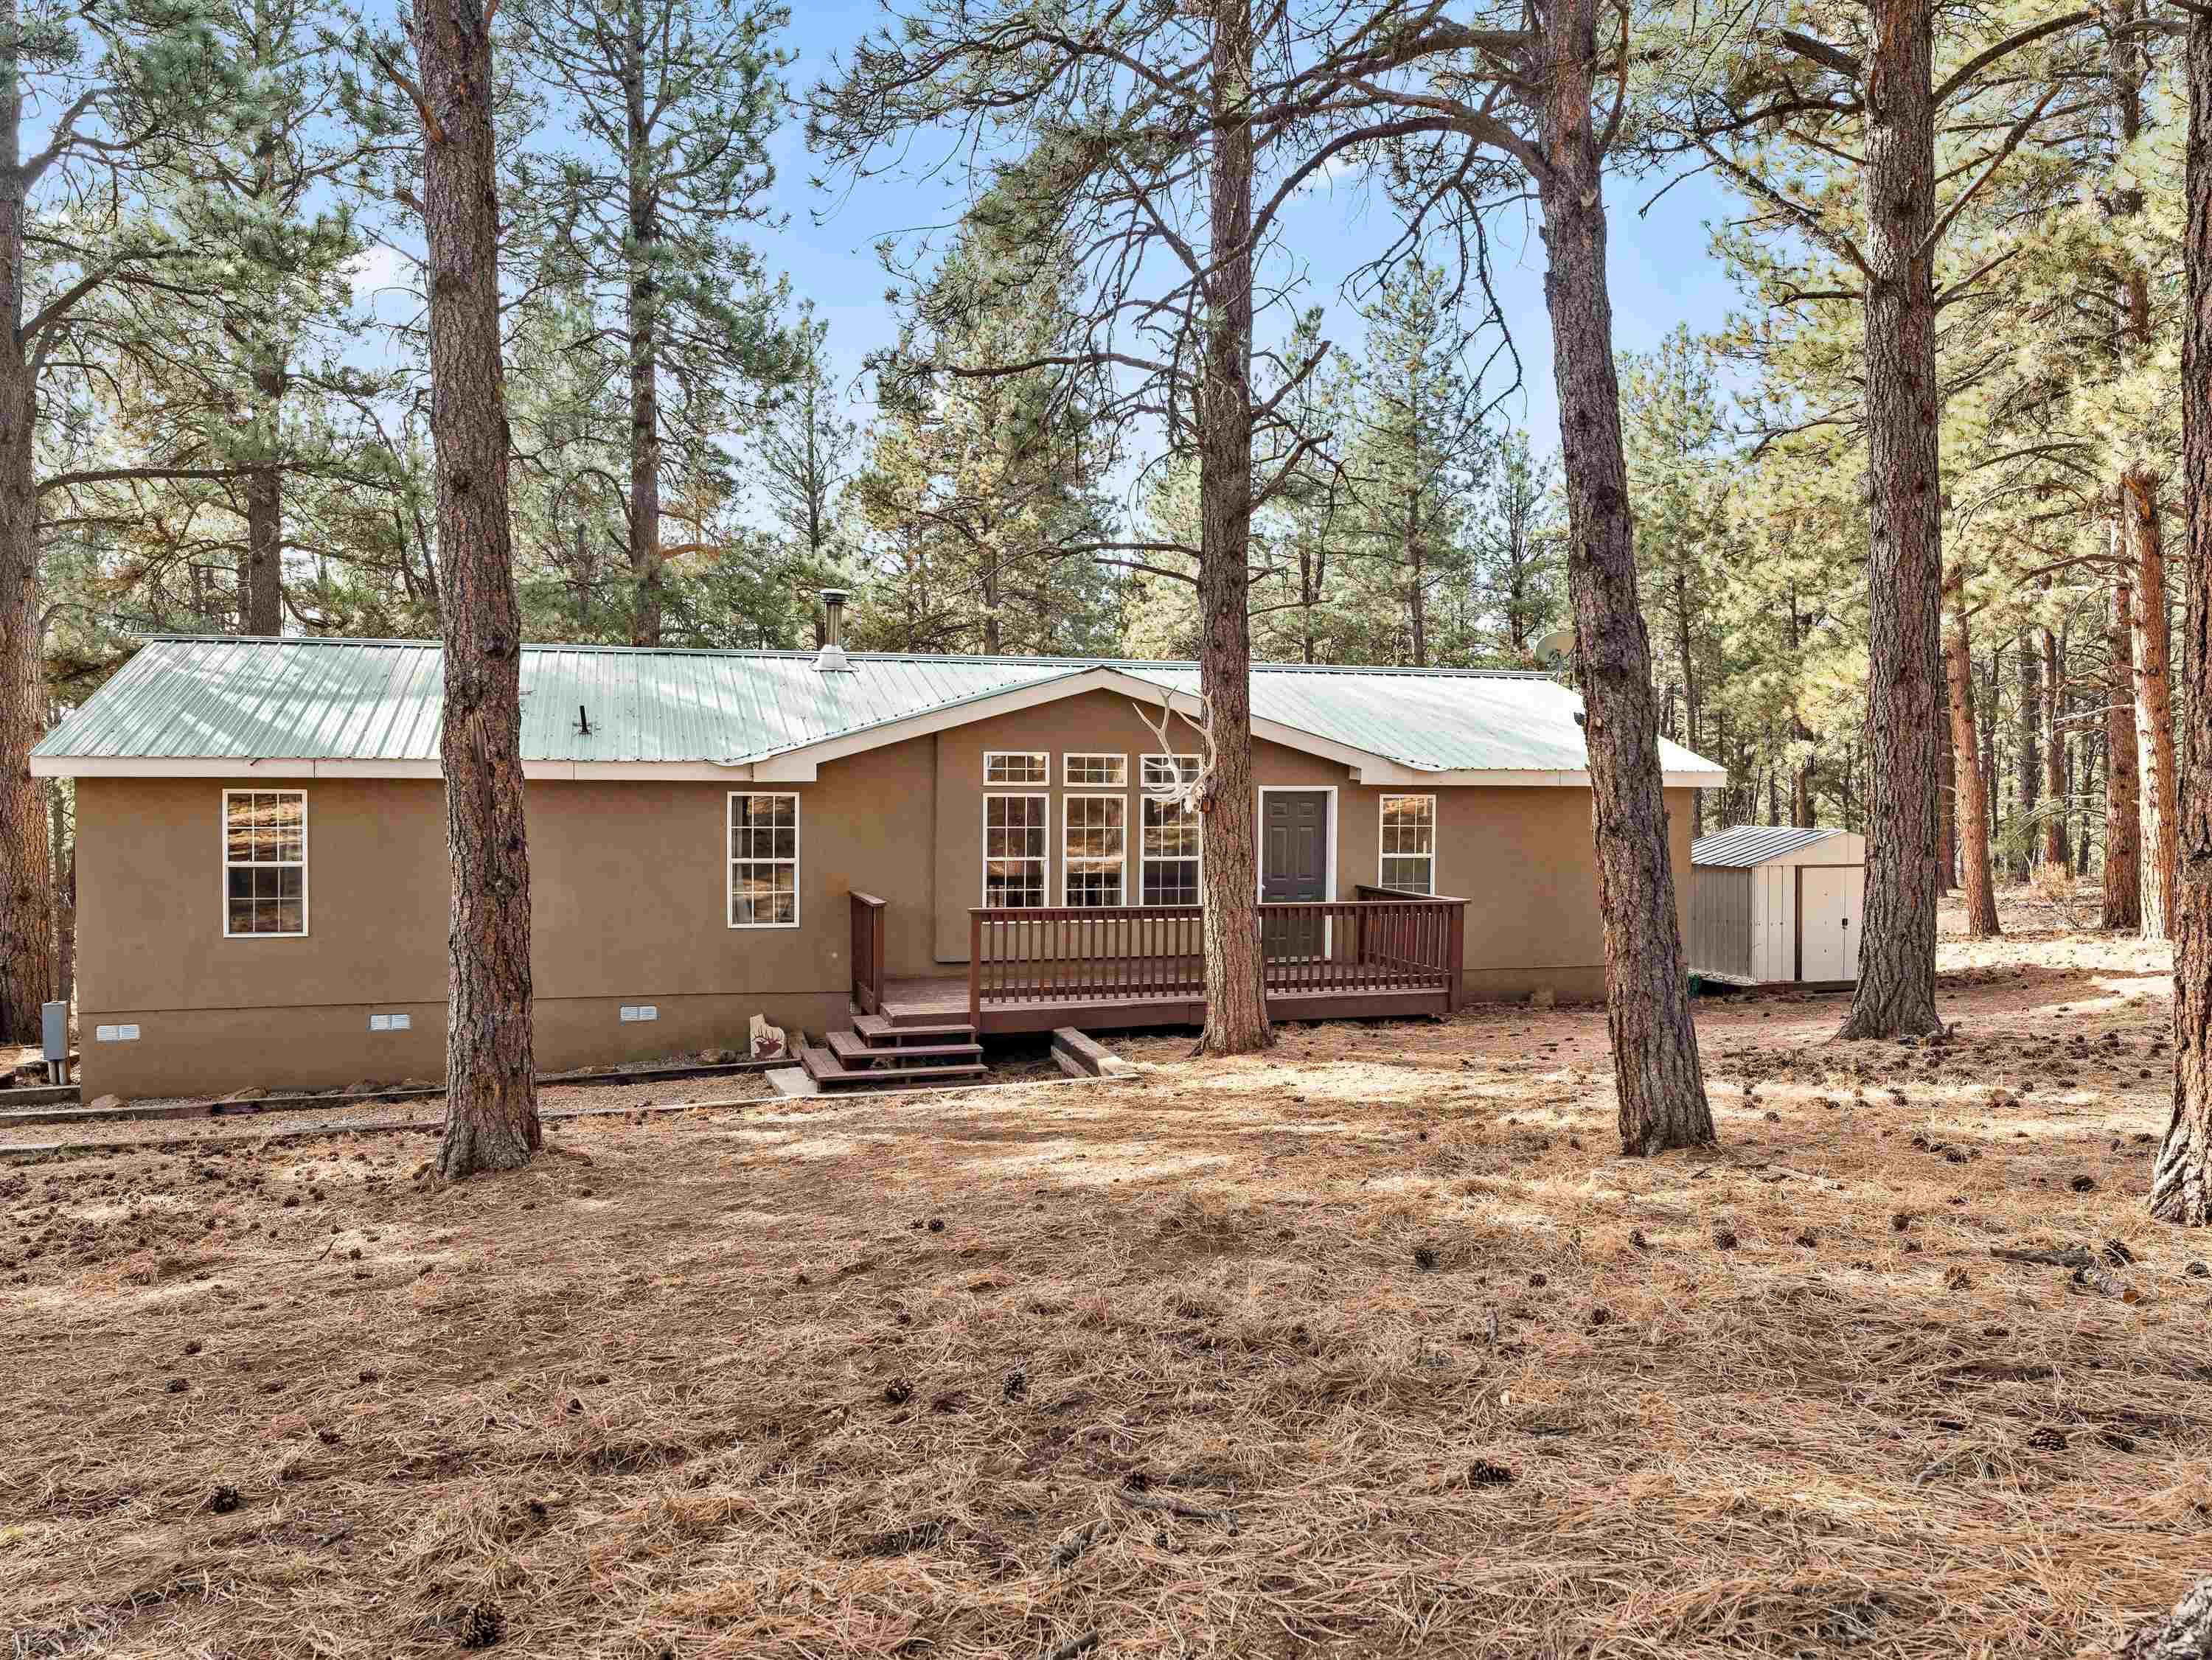 39 Conchas Road, Angel Fire, NM 87718